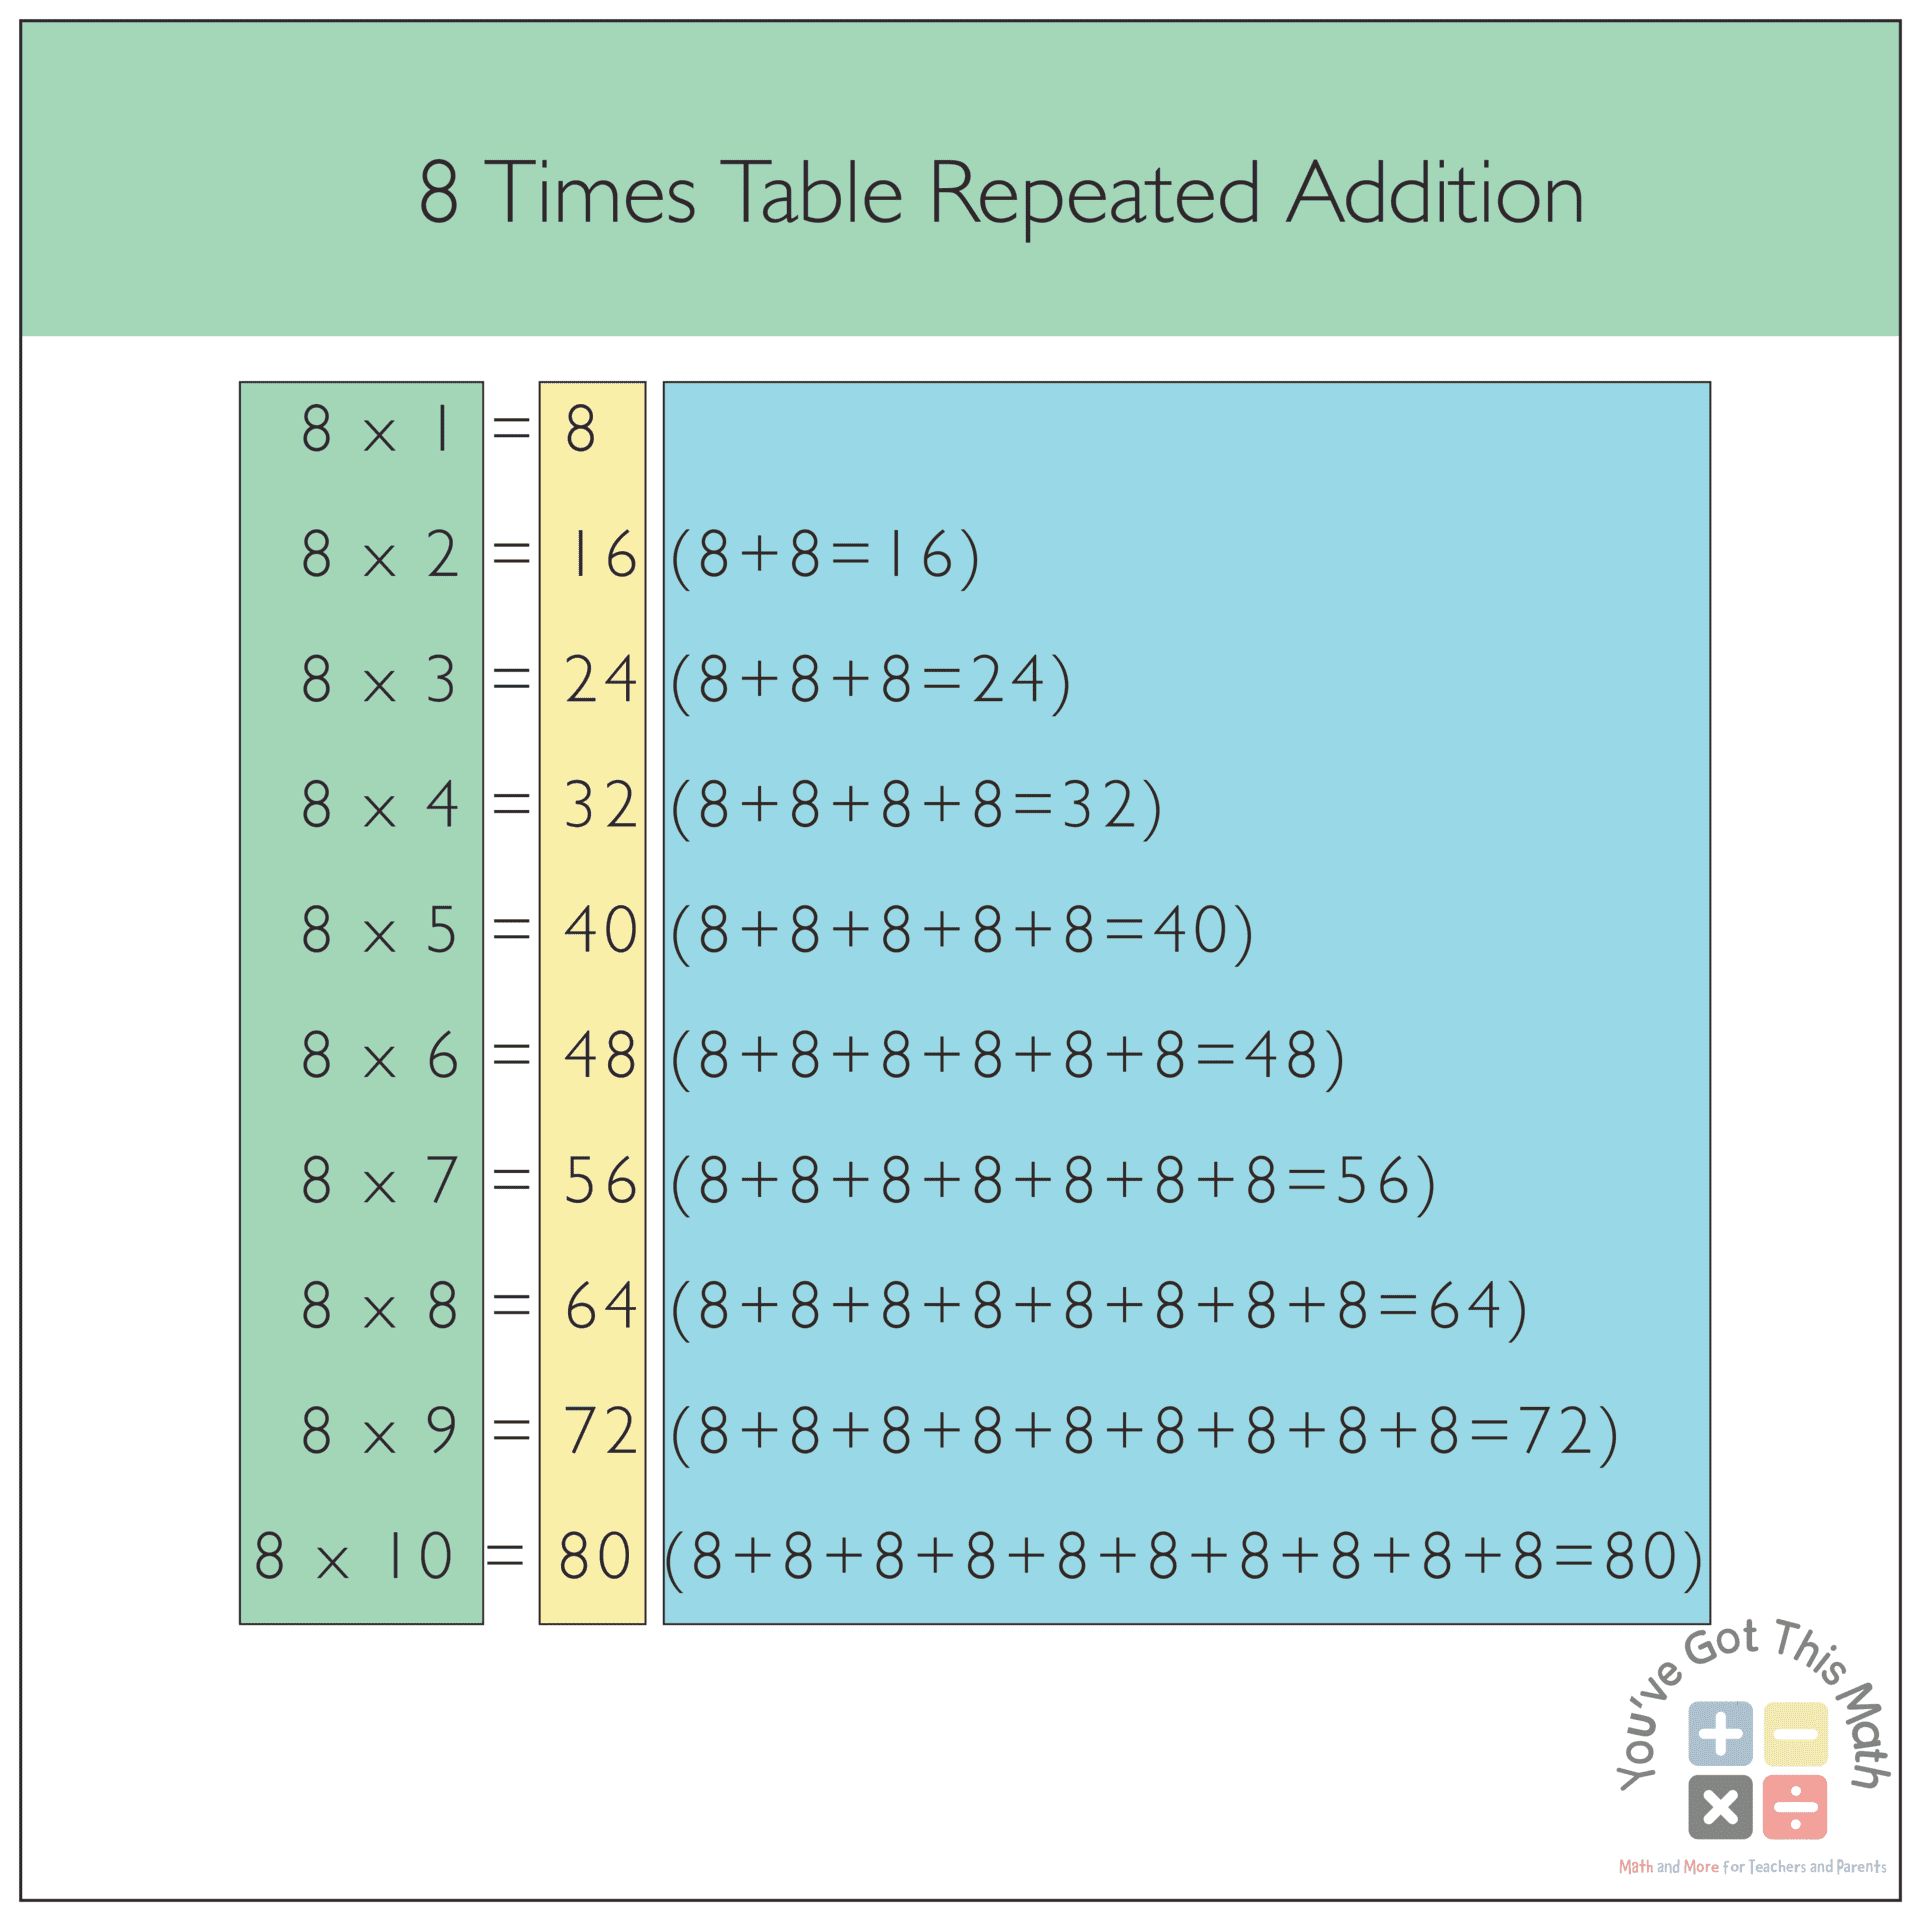 Showing Repeated Addition of 8 in the Times Table Chart